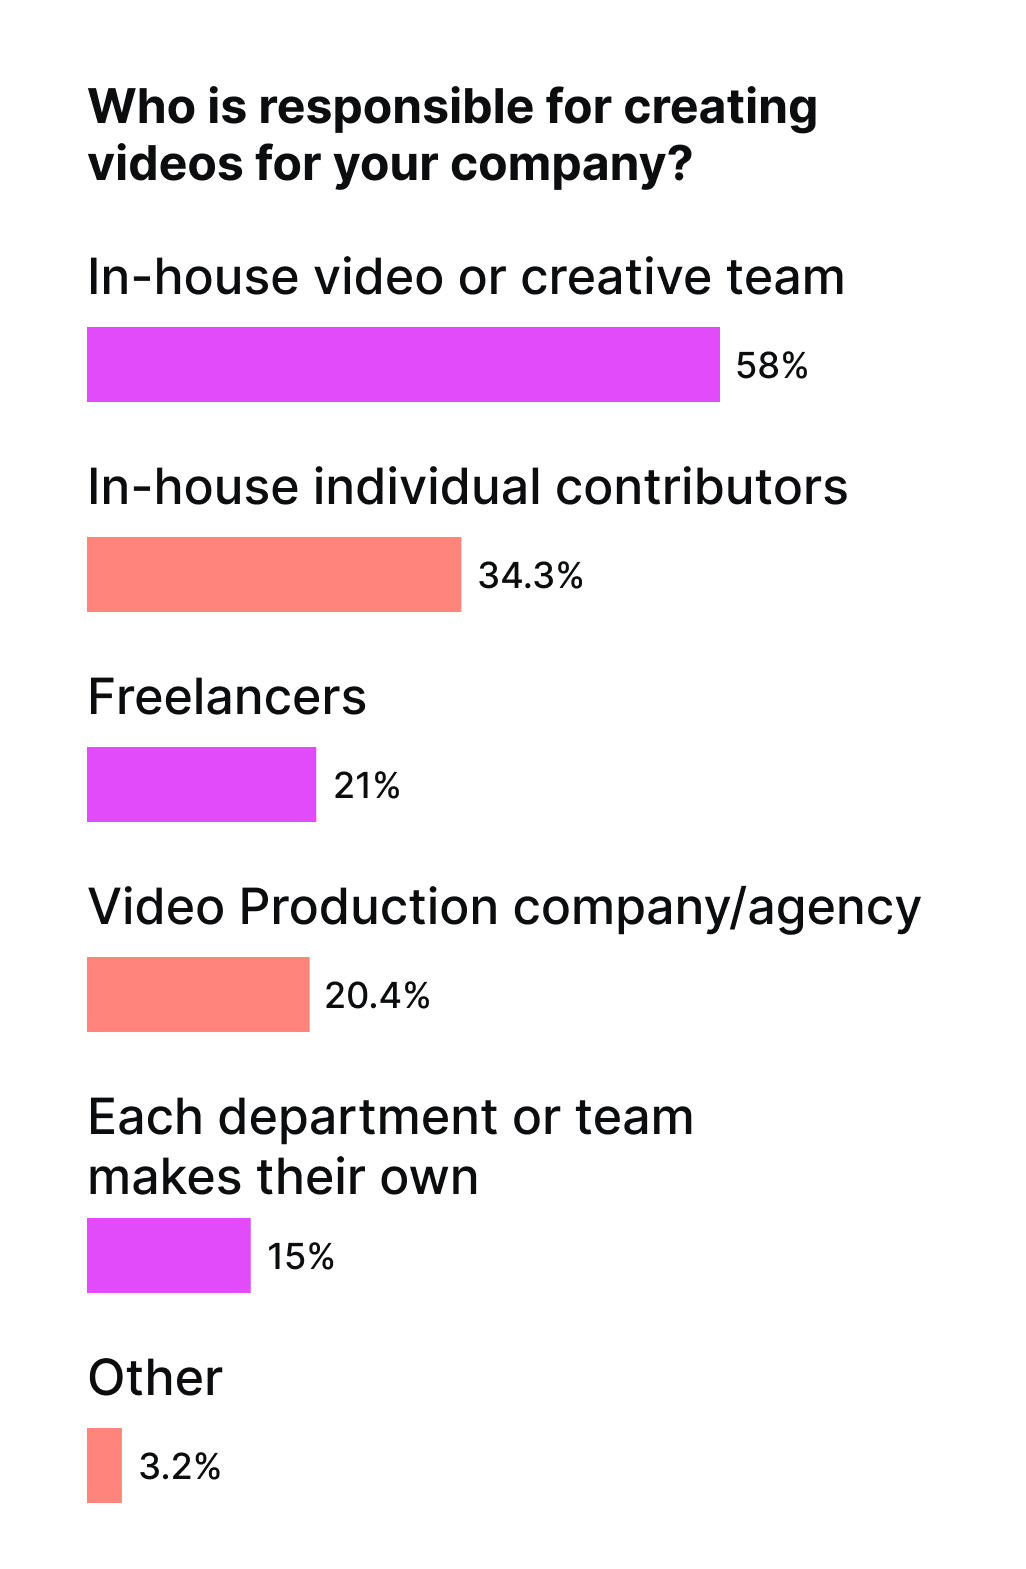 Who is responsible for creating videos for your company?		
In-house video or creative team: 58.0%
In-house individual contributors: 34.3%
Freelancers: 21.0%
Video production company/agency: 20.4%
Each department or team makes their own: 15.0%
Other: 3.2%